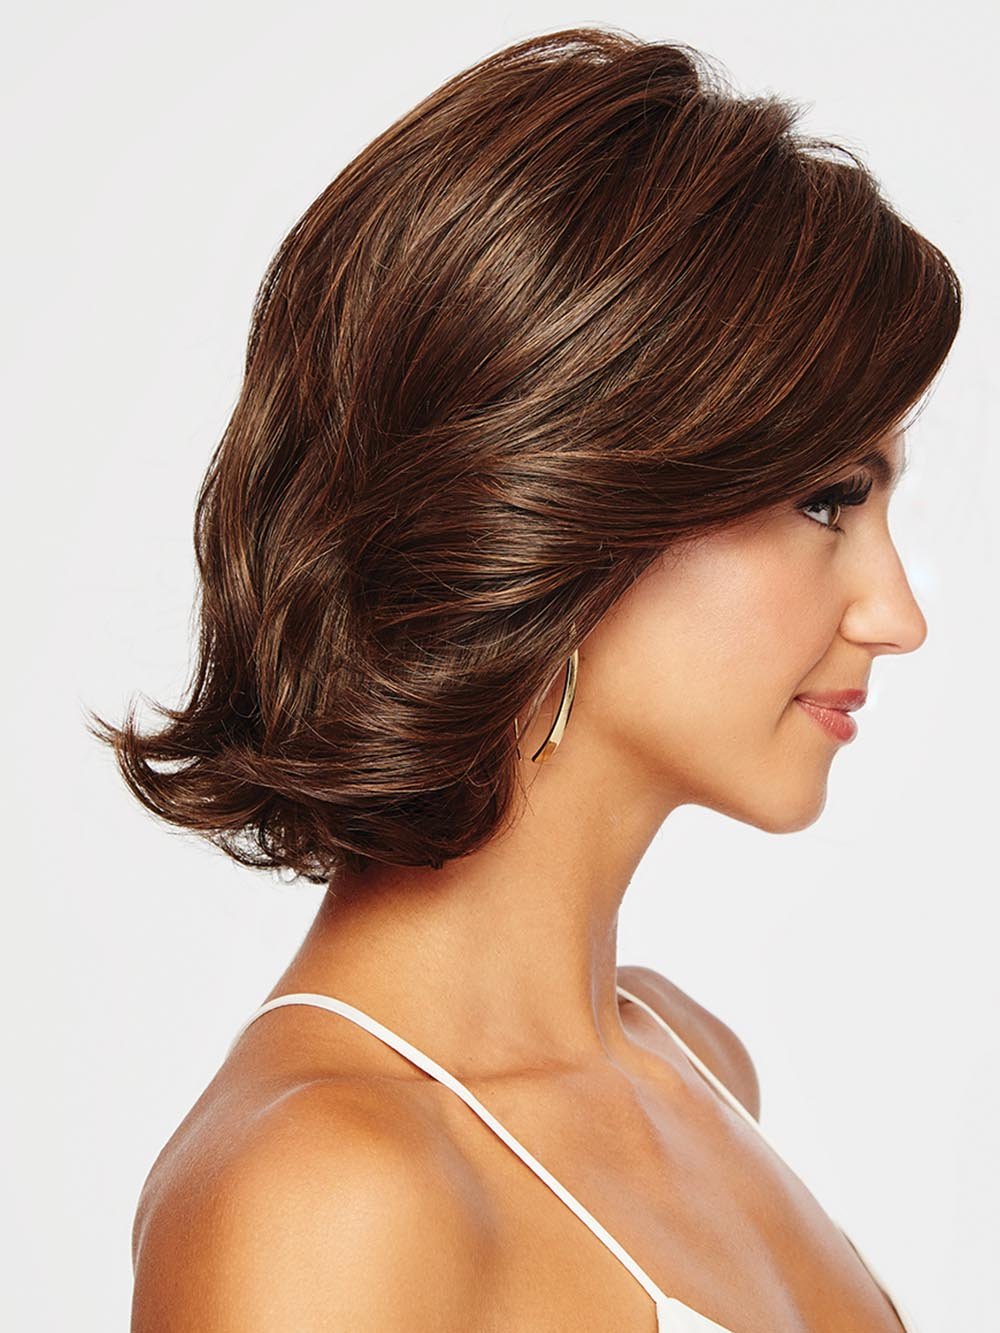 CROWD PLEASER has dramatic side swept bangs and long, subtle layering throughout. 